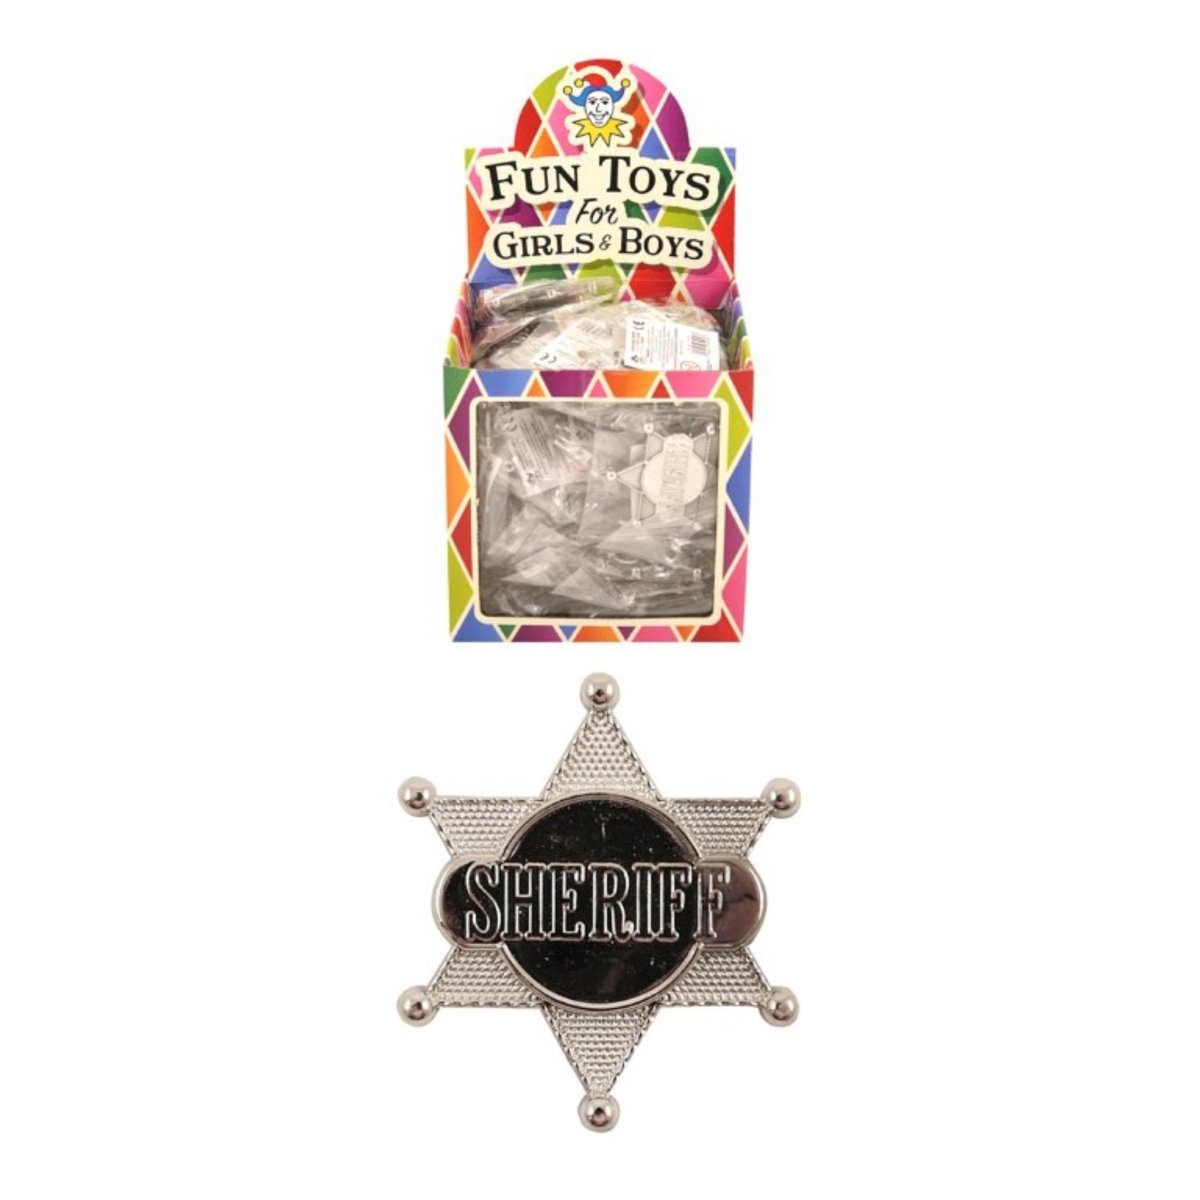 Silver Sheriff Badge (6.4cm x 5.5cm) - Kids Party Craft